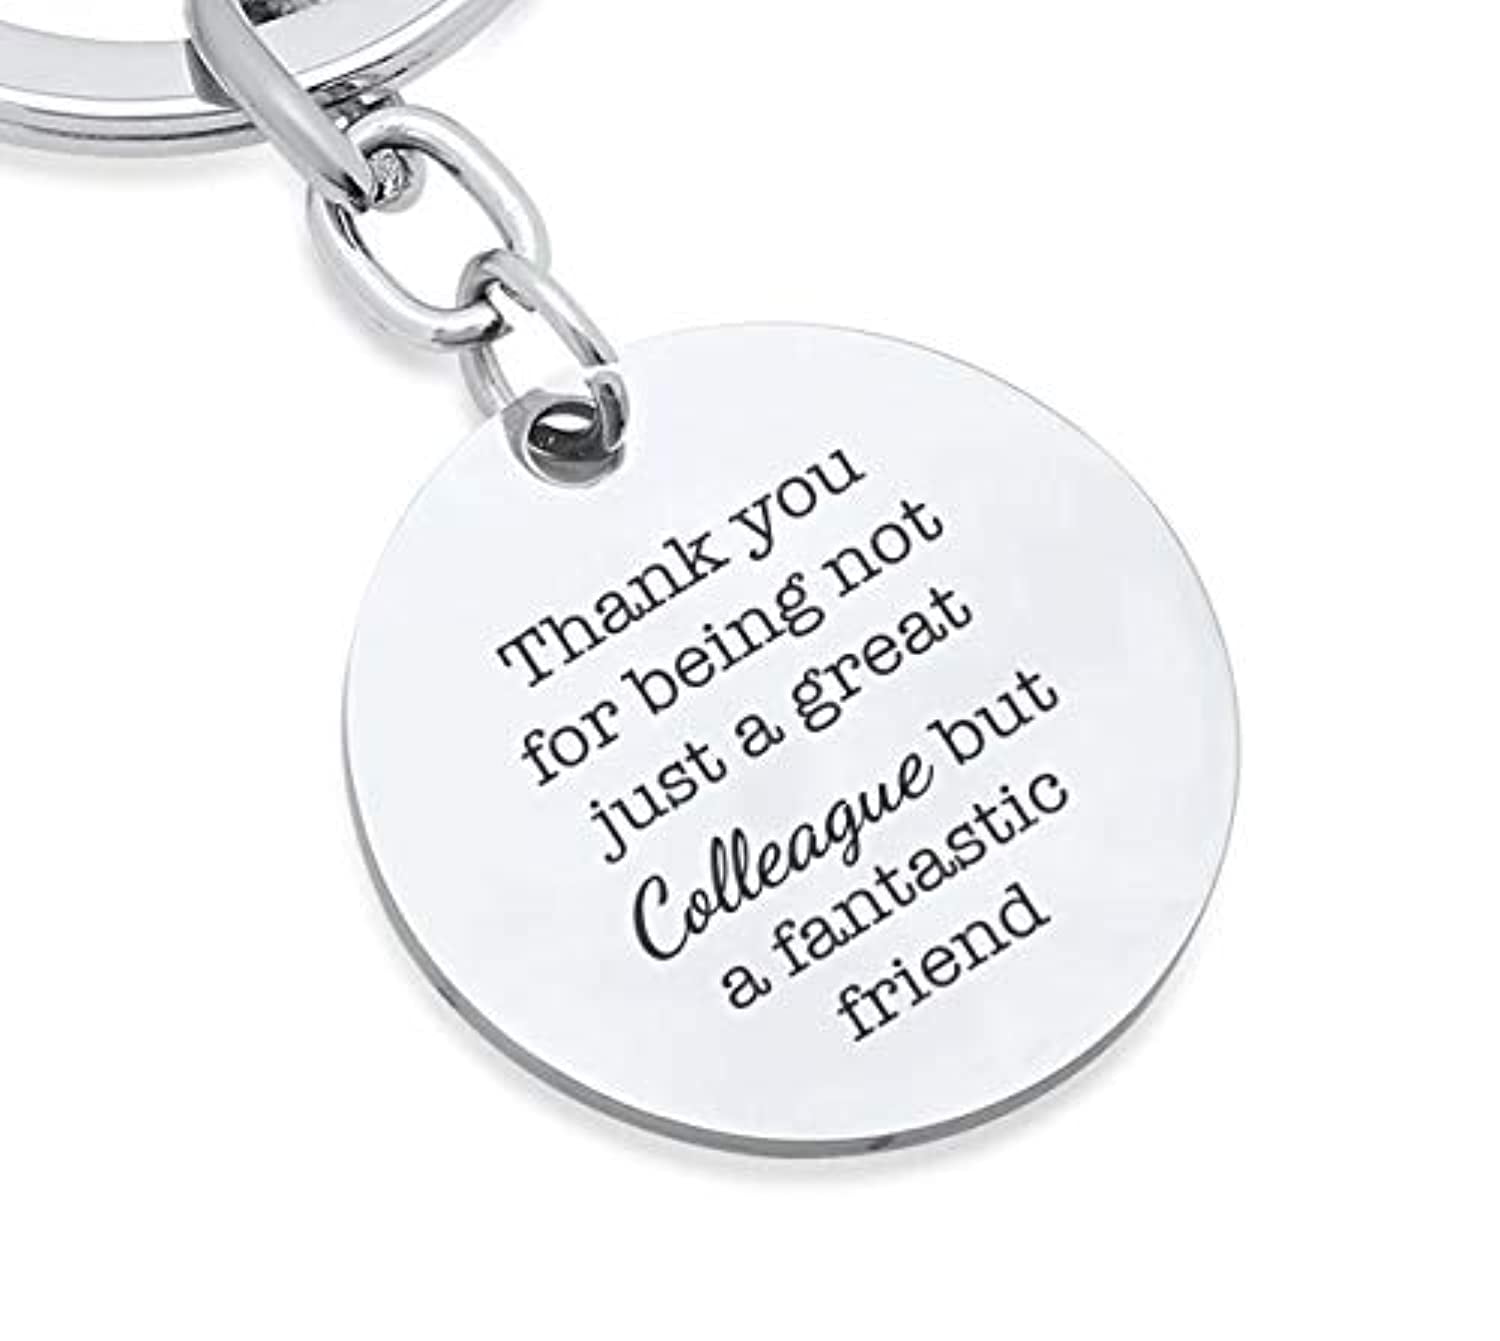 Apple Pencil Cup charm Principal Thanks for helping me grow Keyring Thank you Gift for Teacher Keychain CLEARANCE SALE women or men birthday present from student or coworker Daycare Key Chain